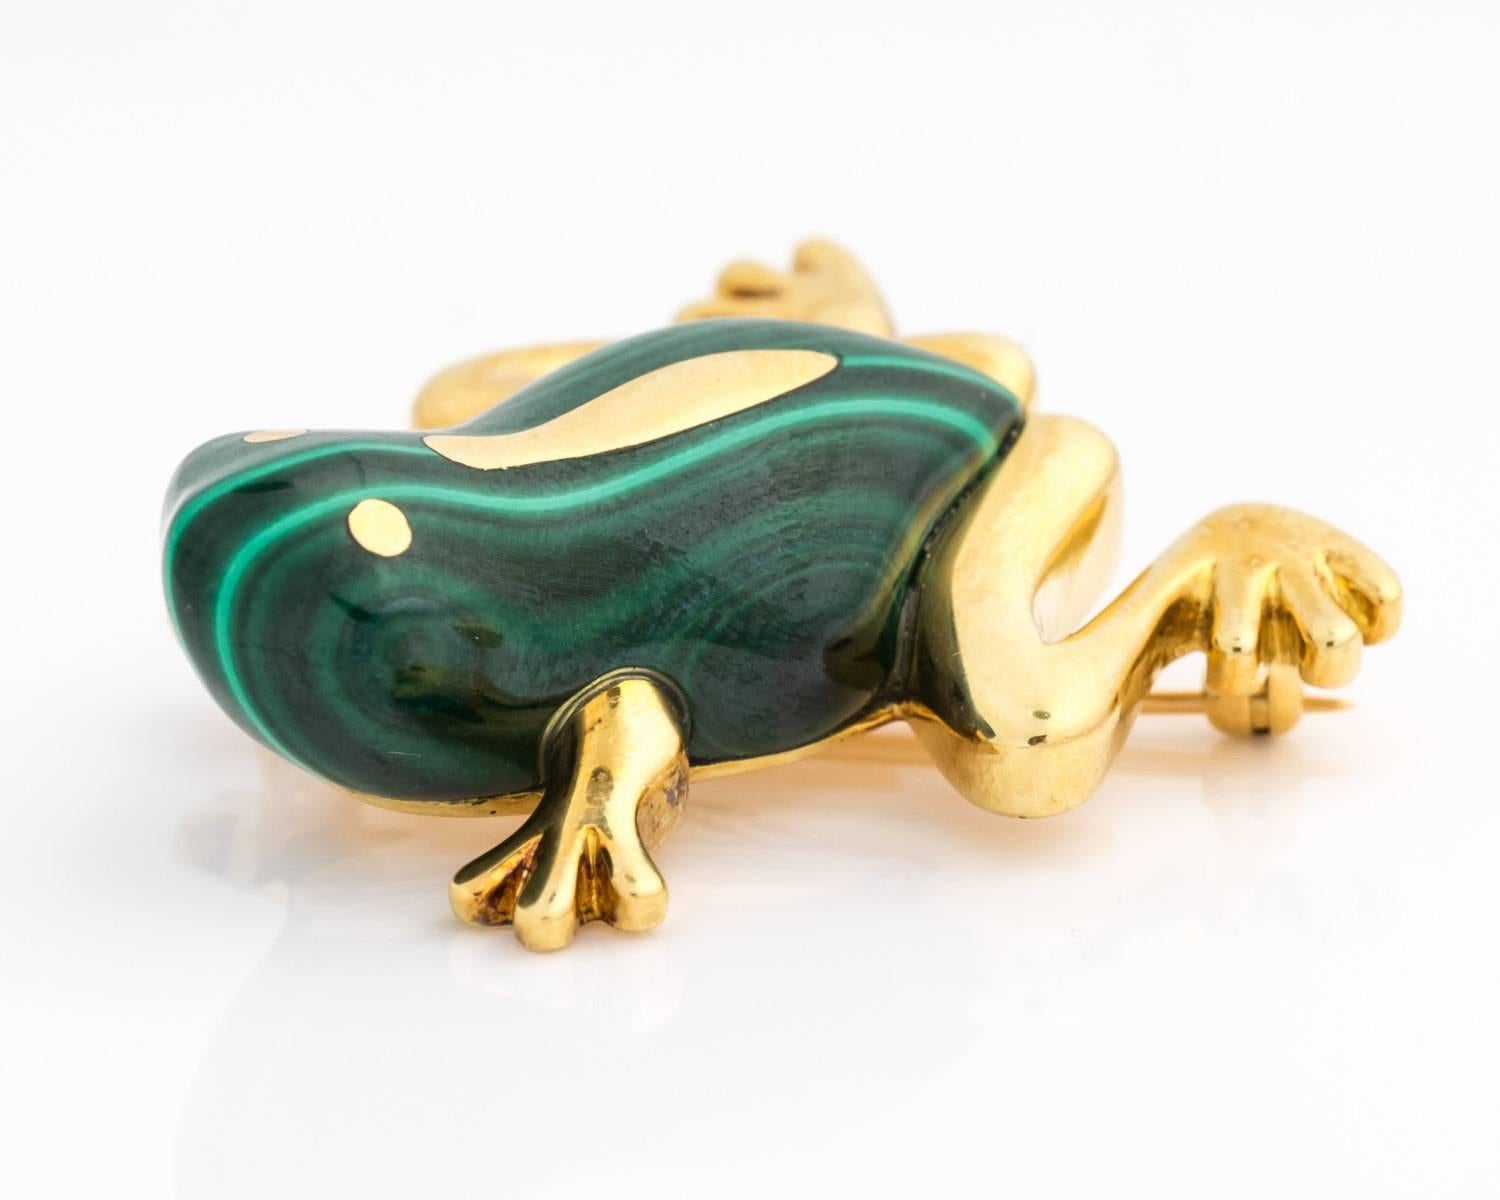 This Tiffany & Co. piece is a limited edition brooch from the Hong Kong Tiffany boutique. The frog is crafted in solid 18 karat yellow gold totaling to 19.4 grams. This pin is better worn on a blazer or jacket because of its size and weight. The